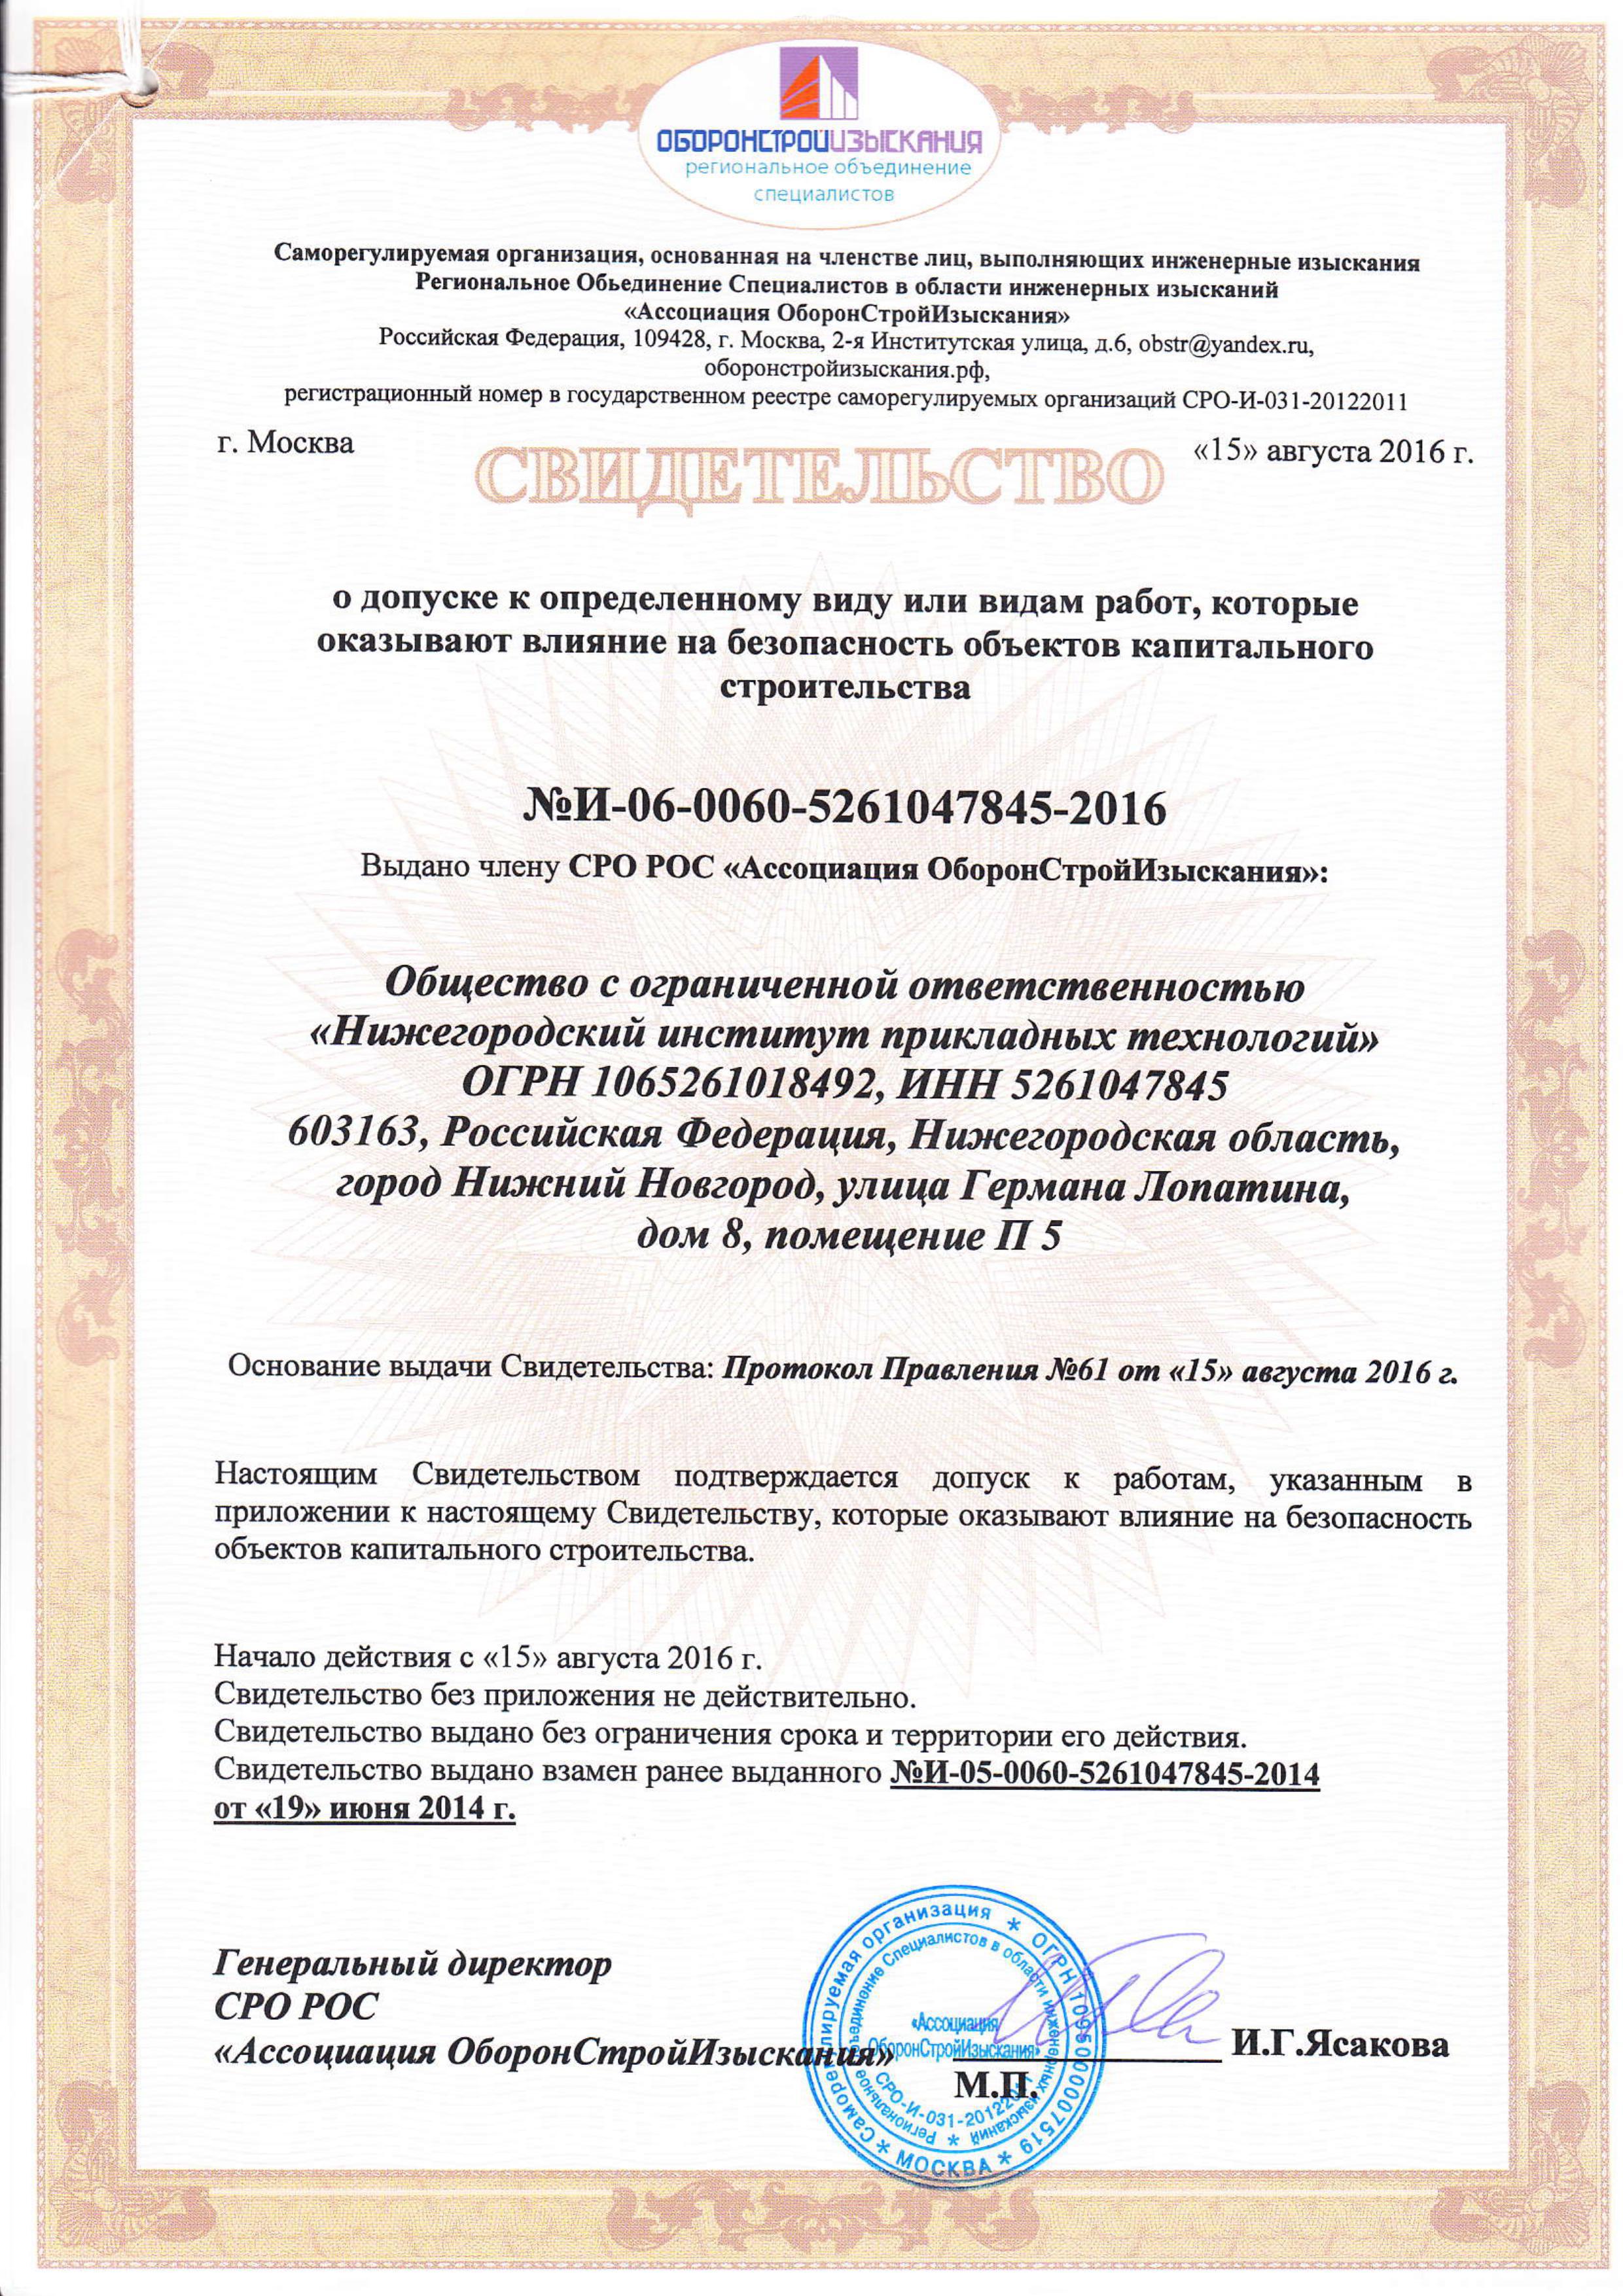 The company received Certificate И-06-0060-5261047845-2016